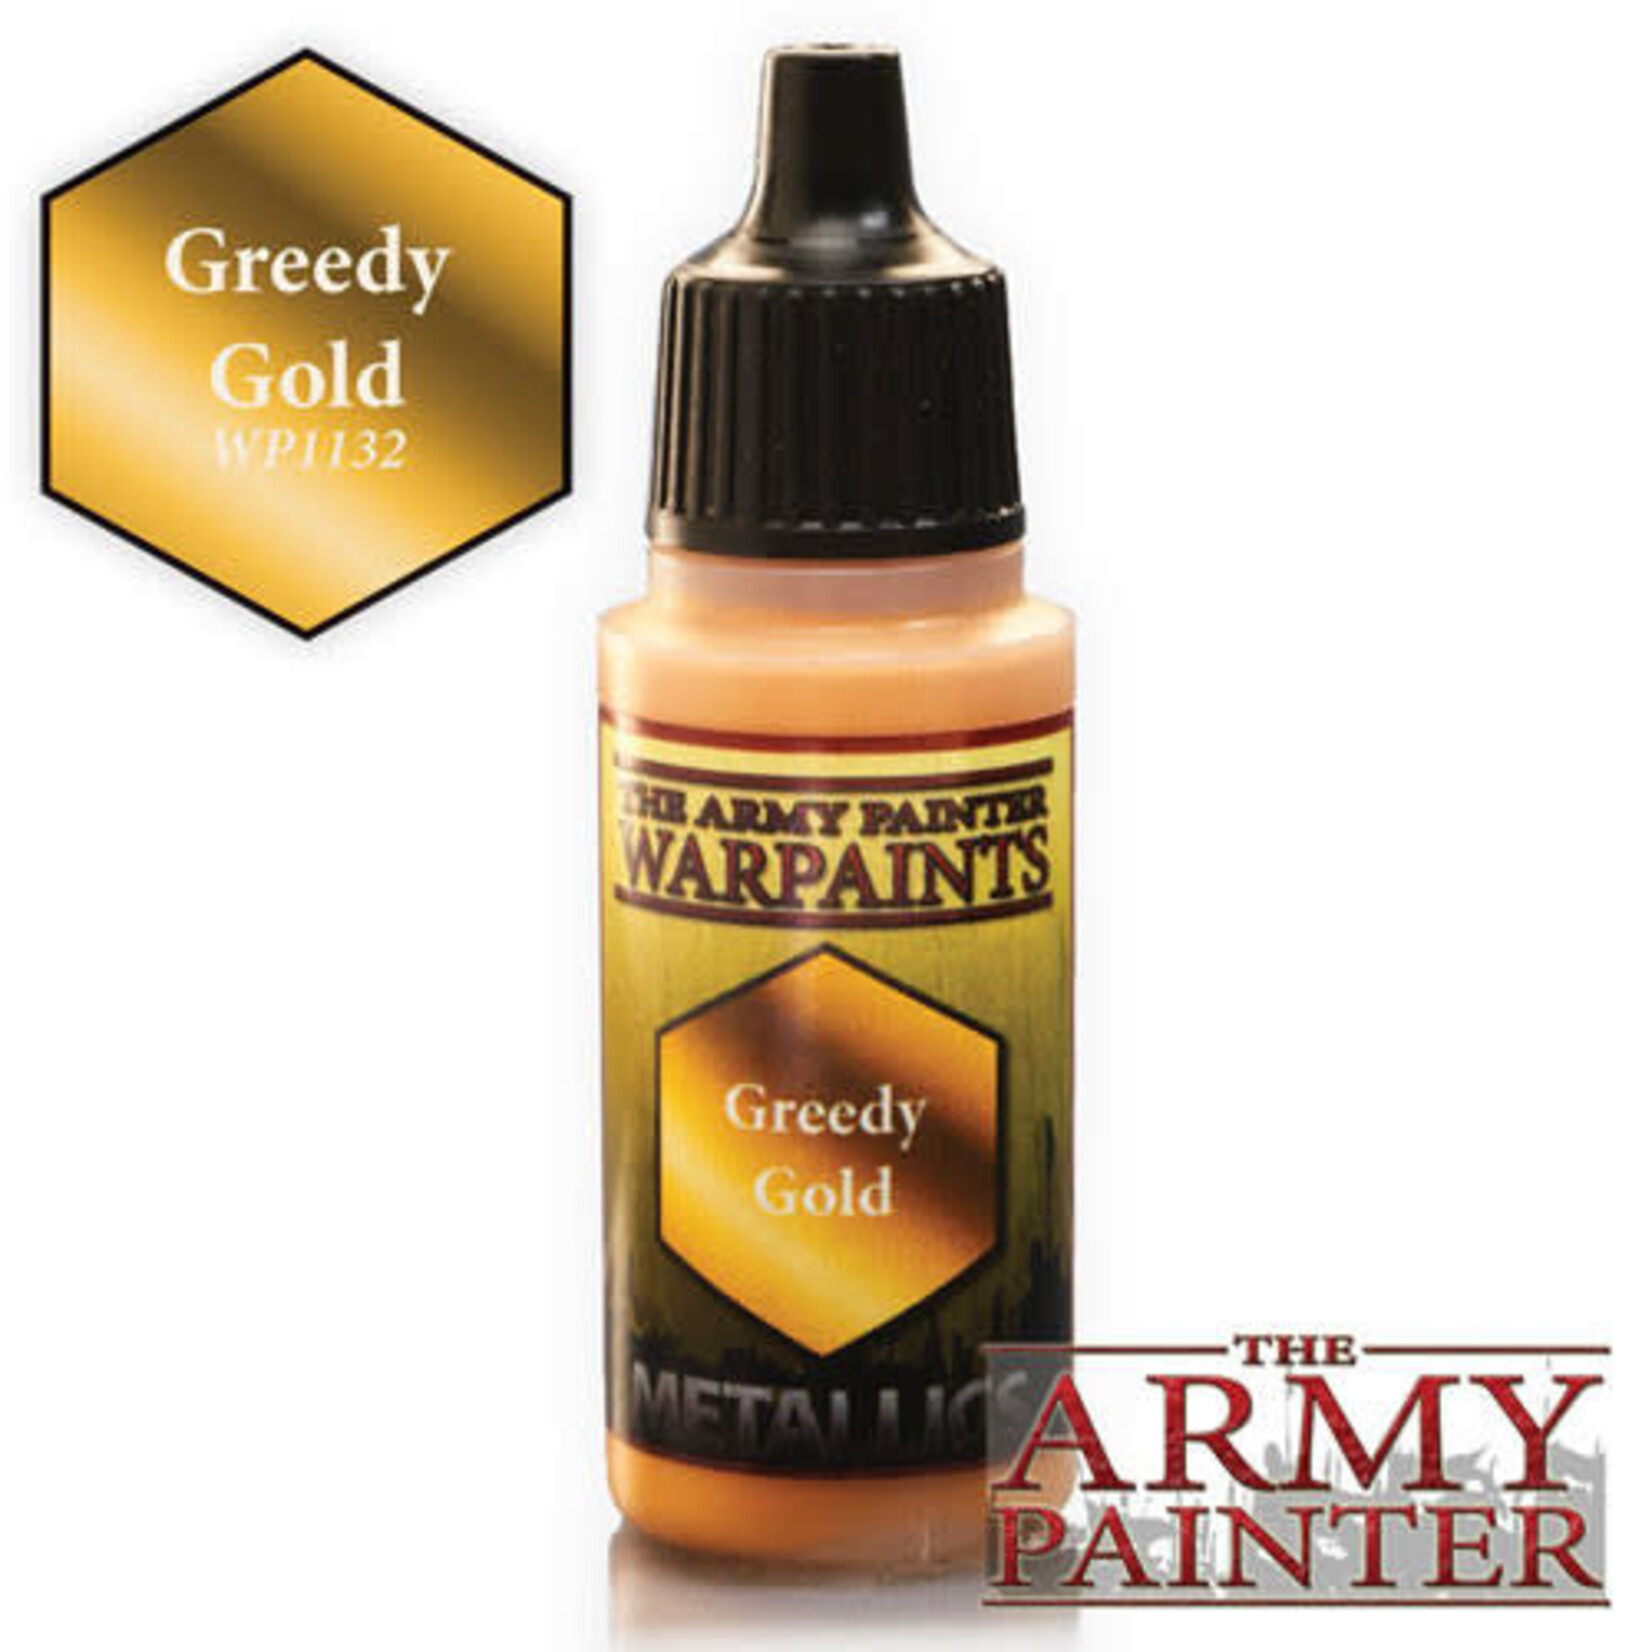 The Army Painter Warpaints: Greedy Gold 18ml